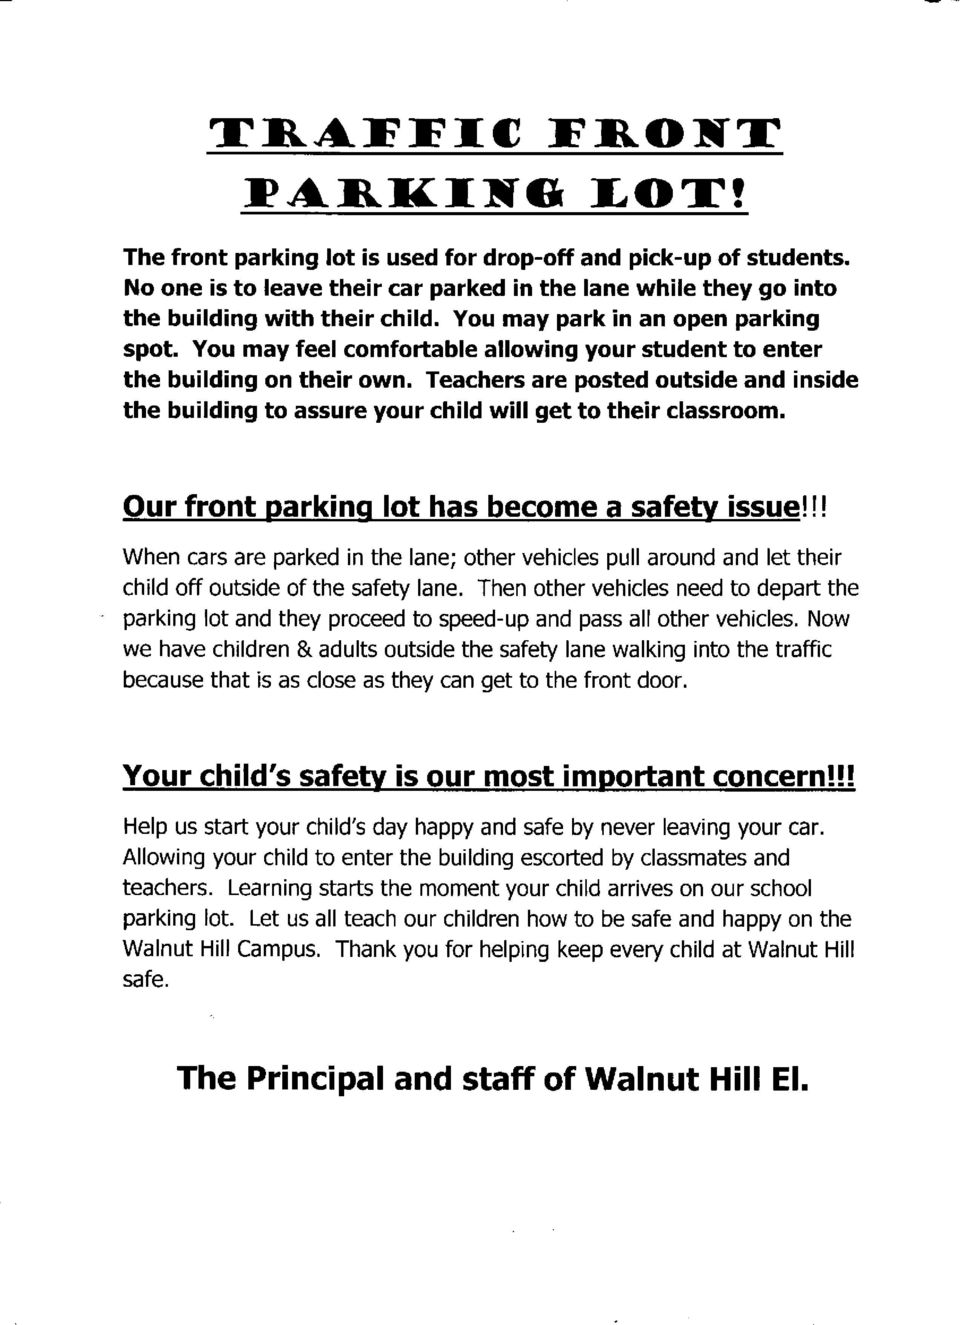 Teachers are posted outside and inside the building to assure your child will get to their classroom. Our front parking lot has become a safety issue!